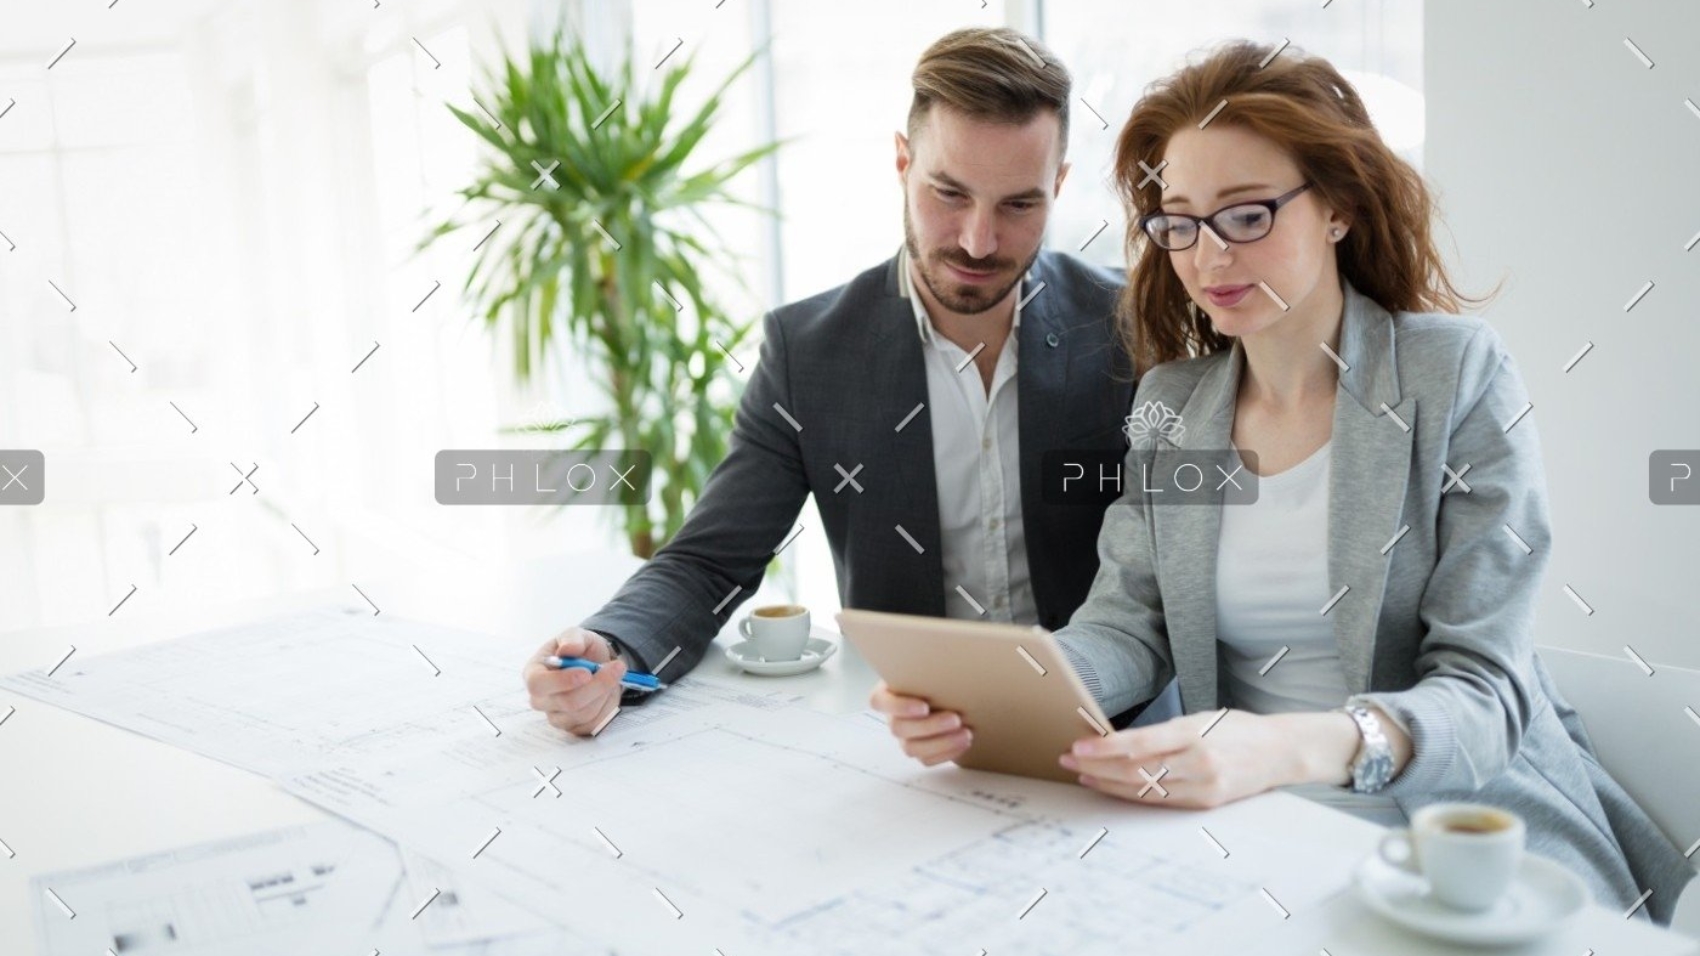 demo-attachment-596-portrait-of-young-architect-woman-on-meeting-KFZCE3A